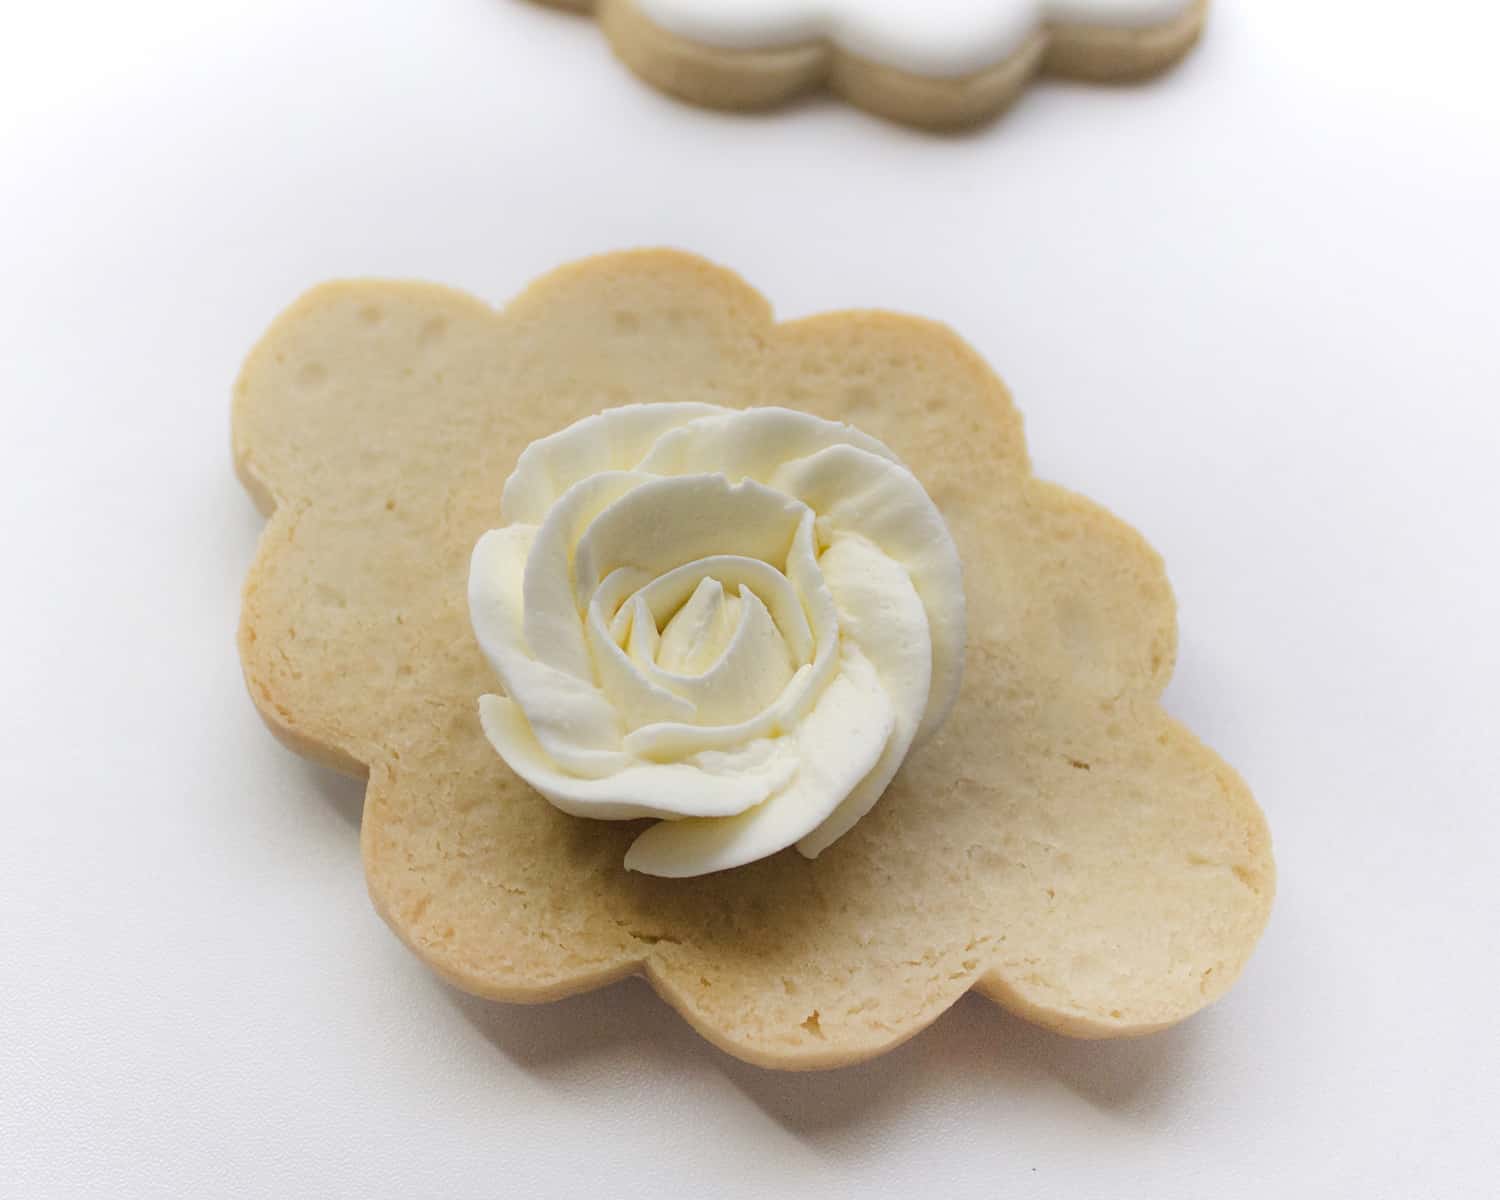 Shape the flower by icing on the cookie